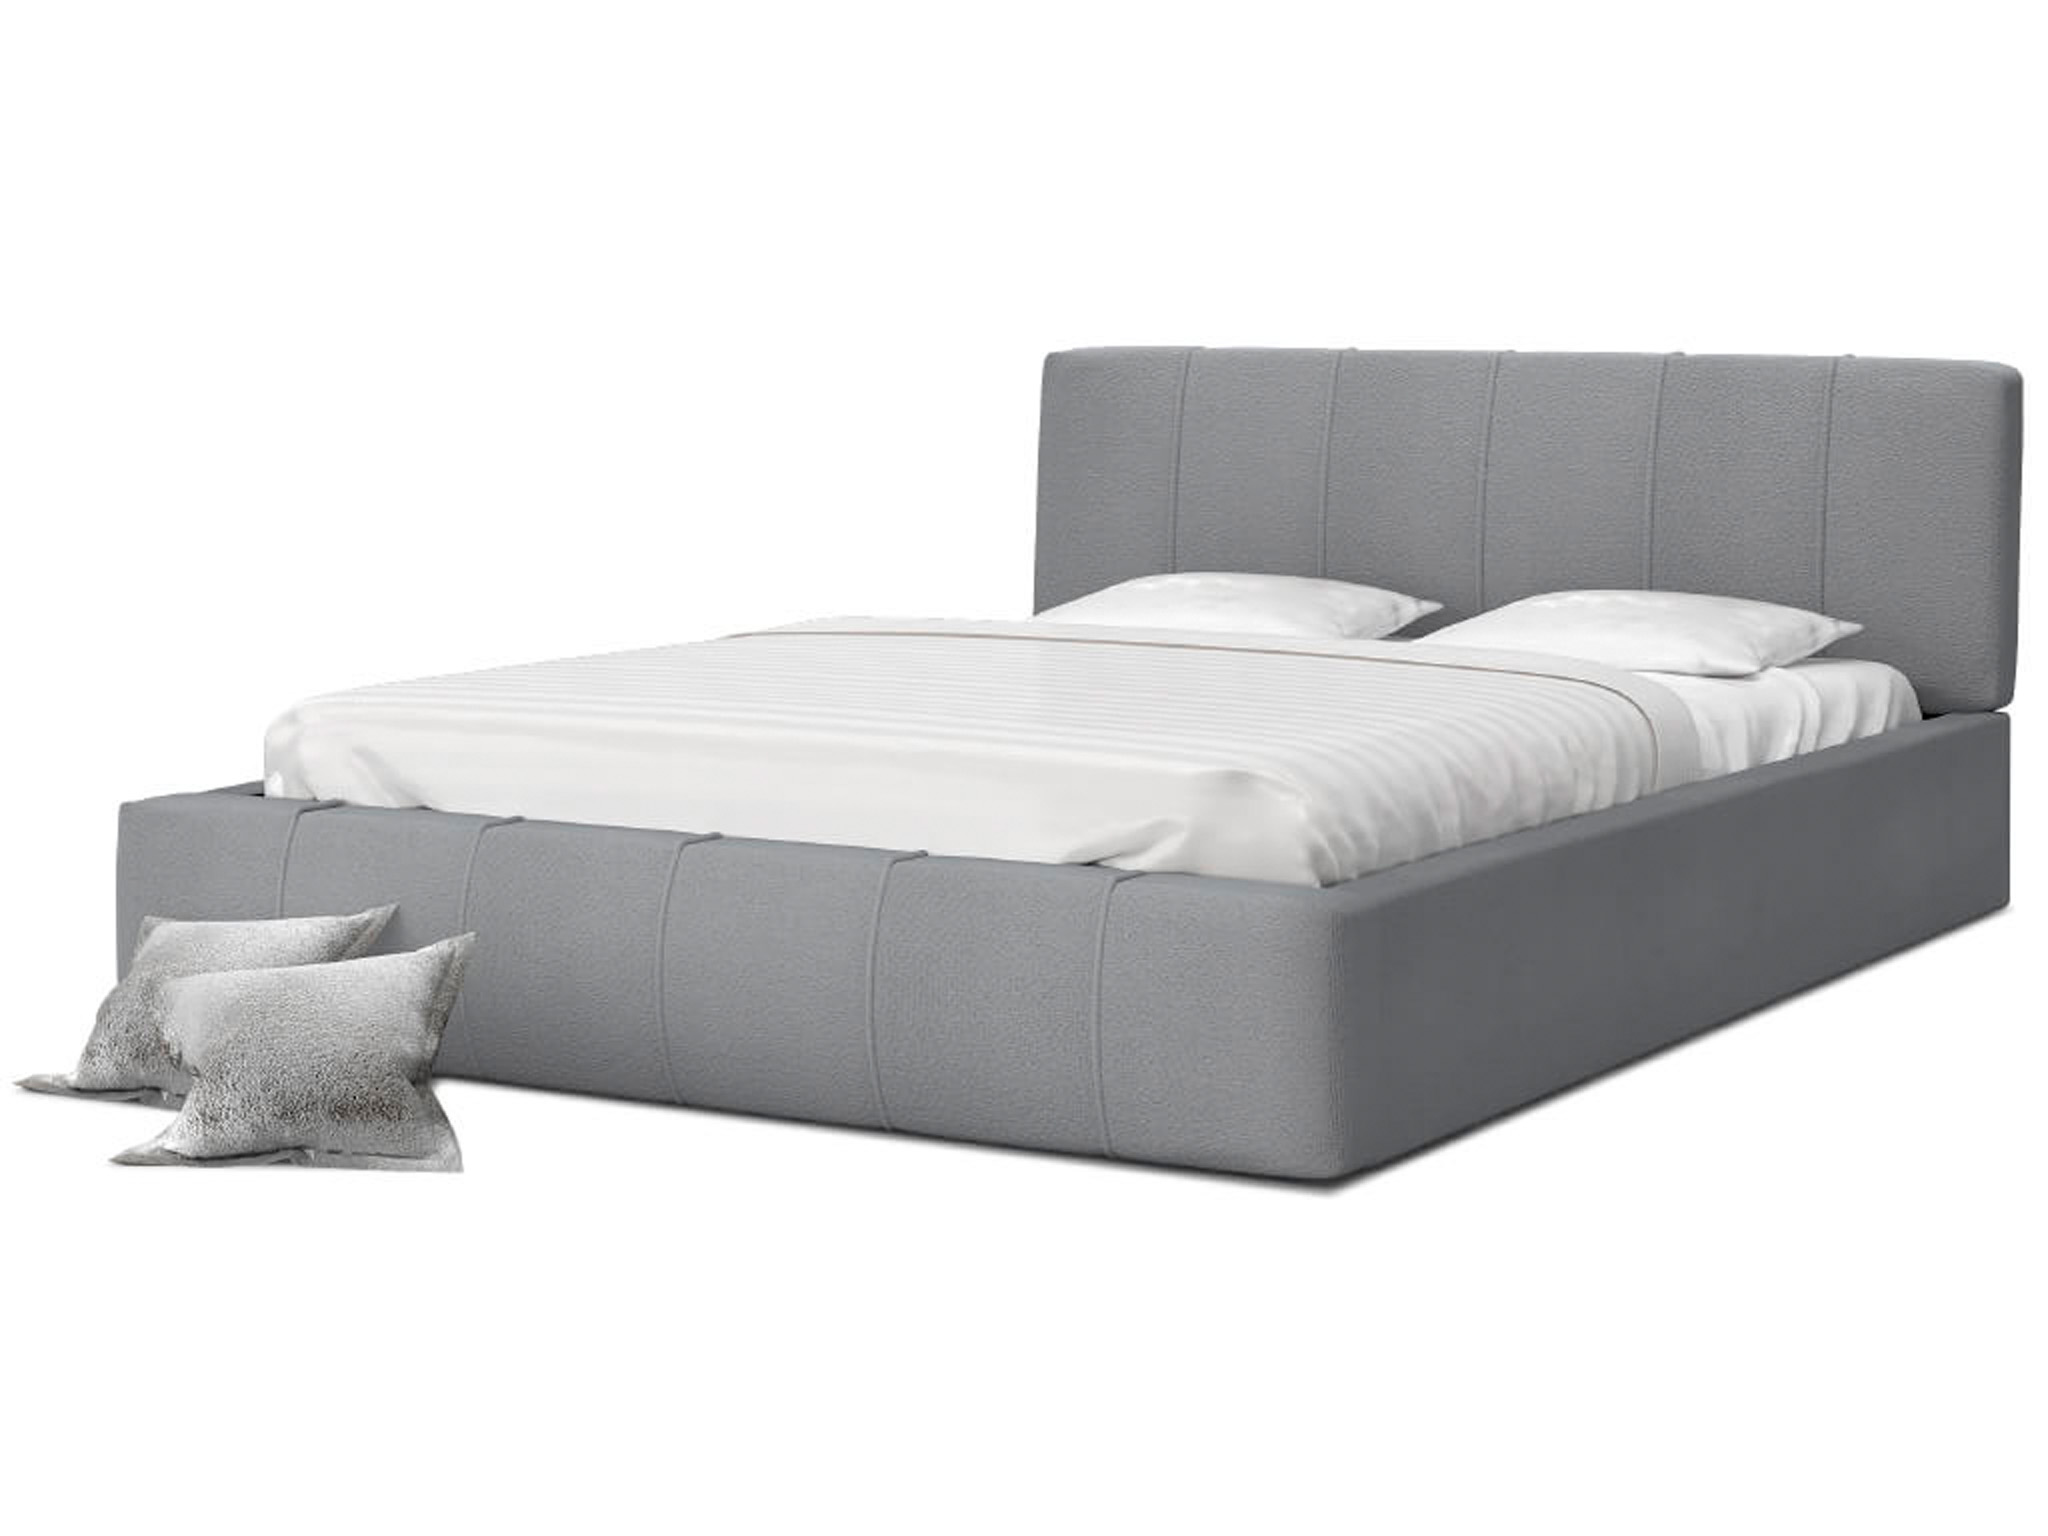 GM Upholstered double bed with storage space Fiona - grey Size: 140x200